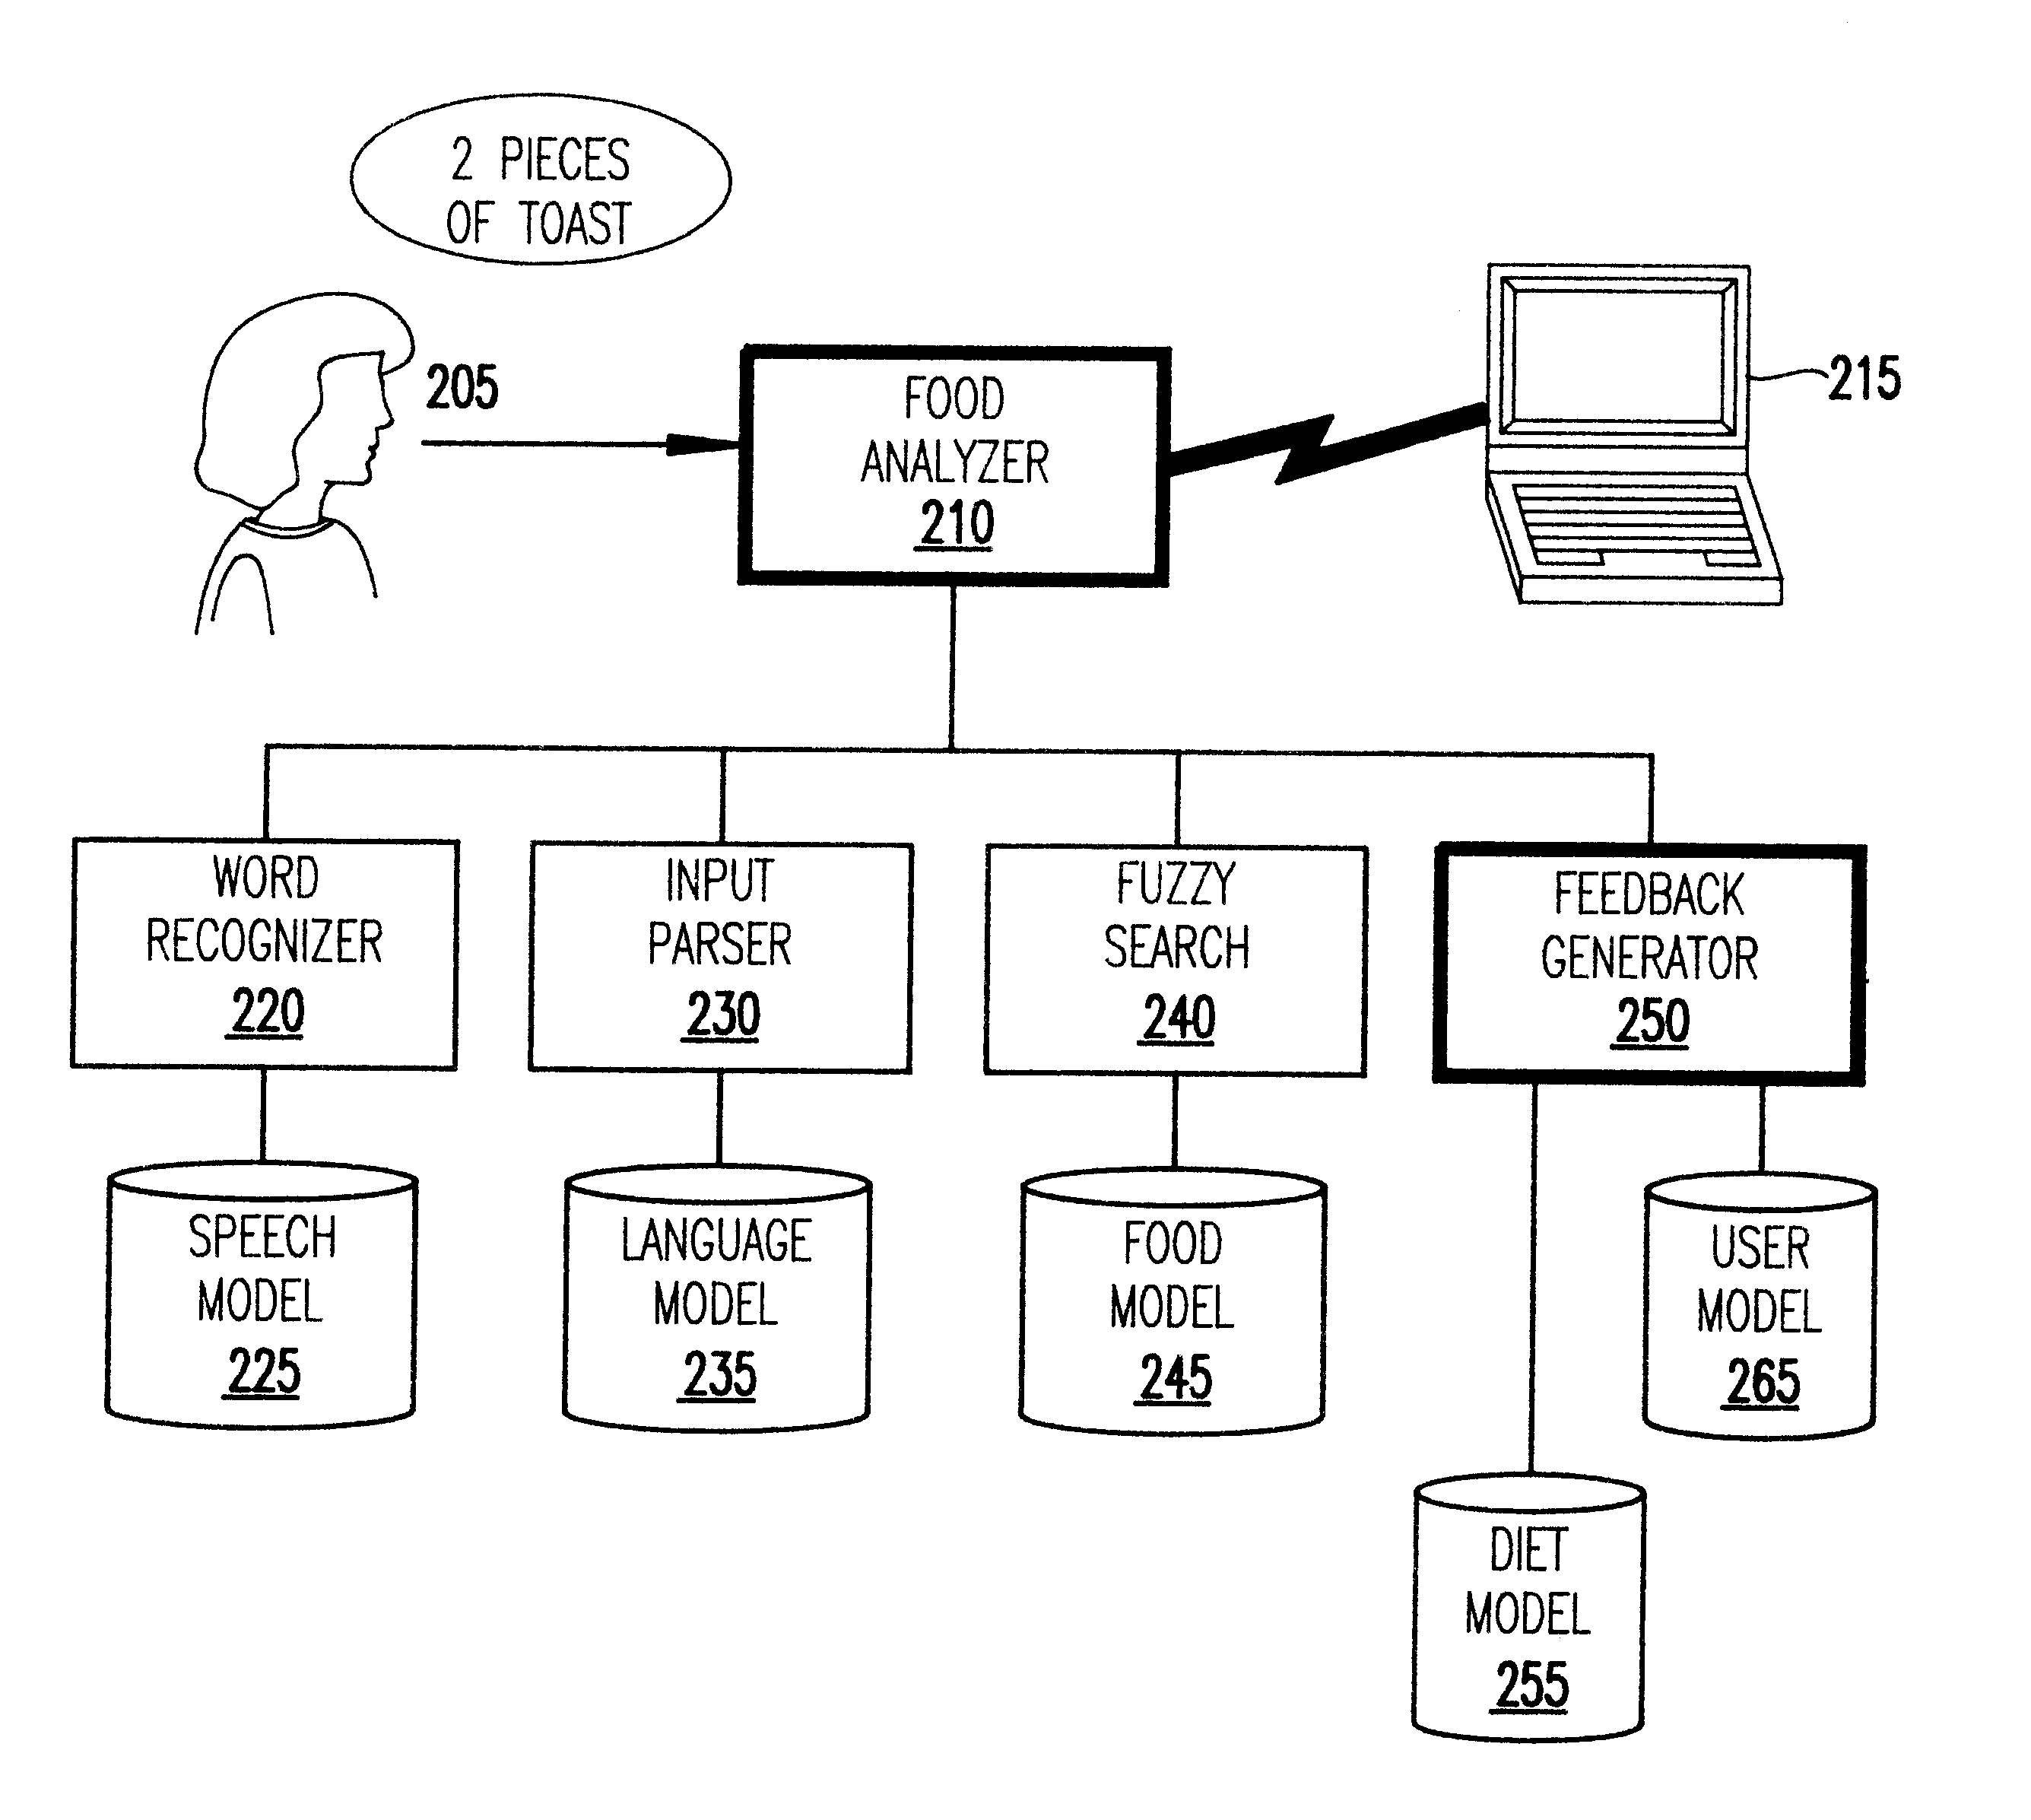 User state sensitive system and method for nutrient analysis using natural language interface